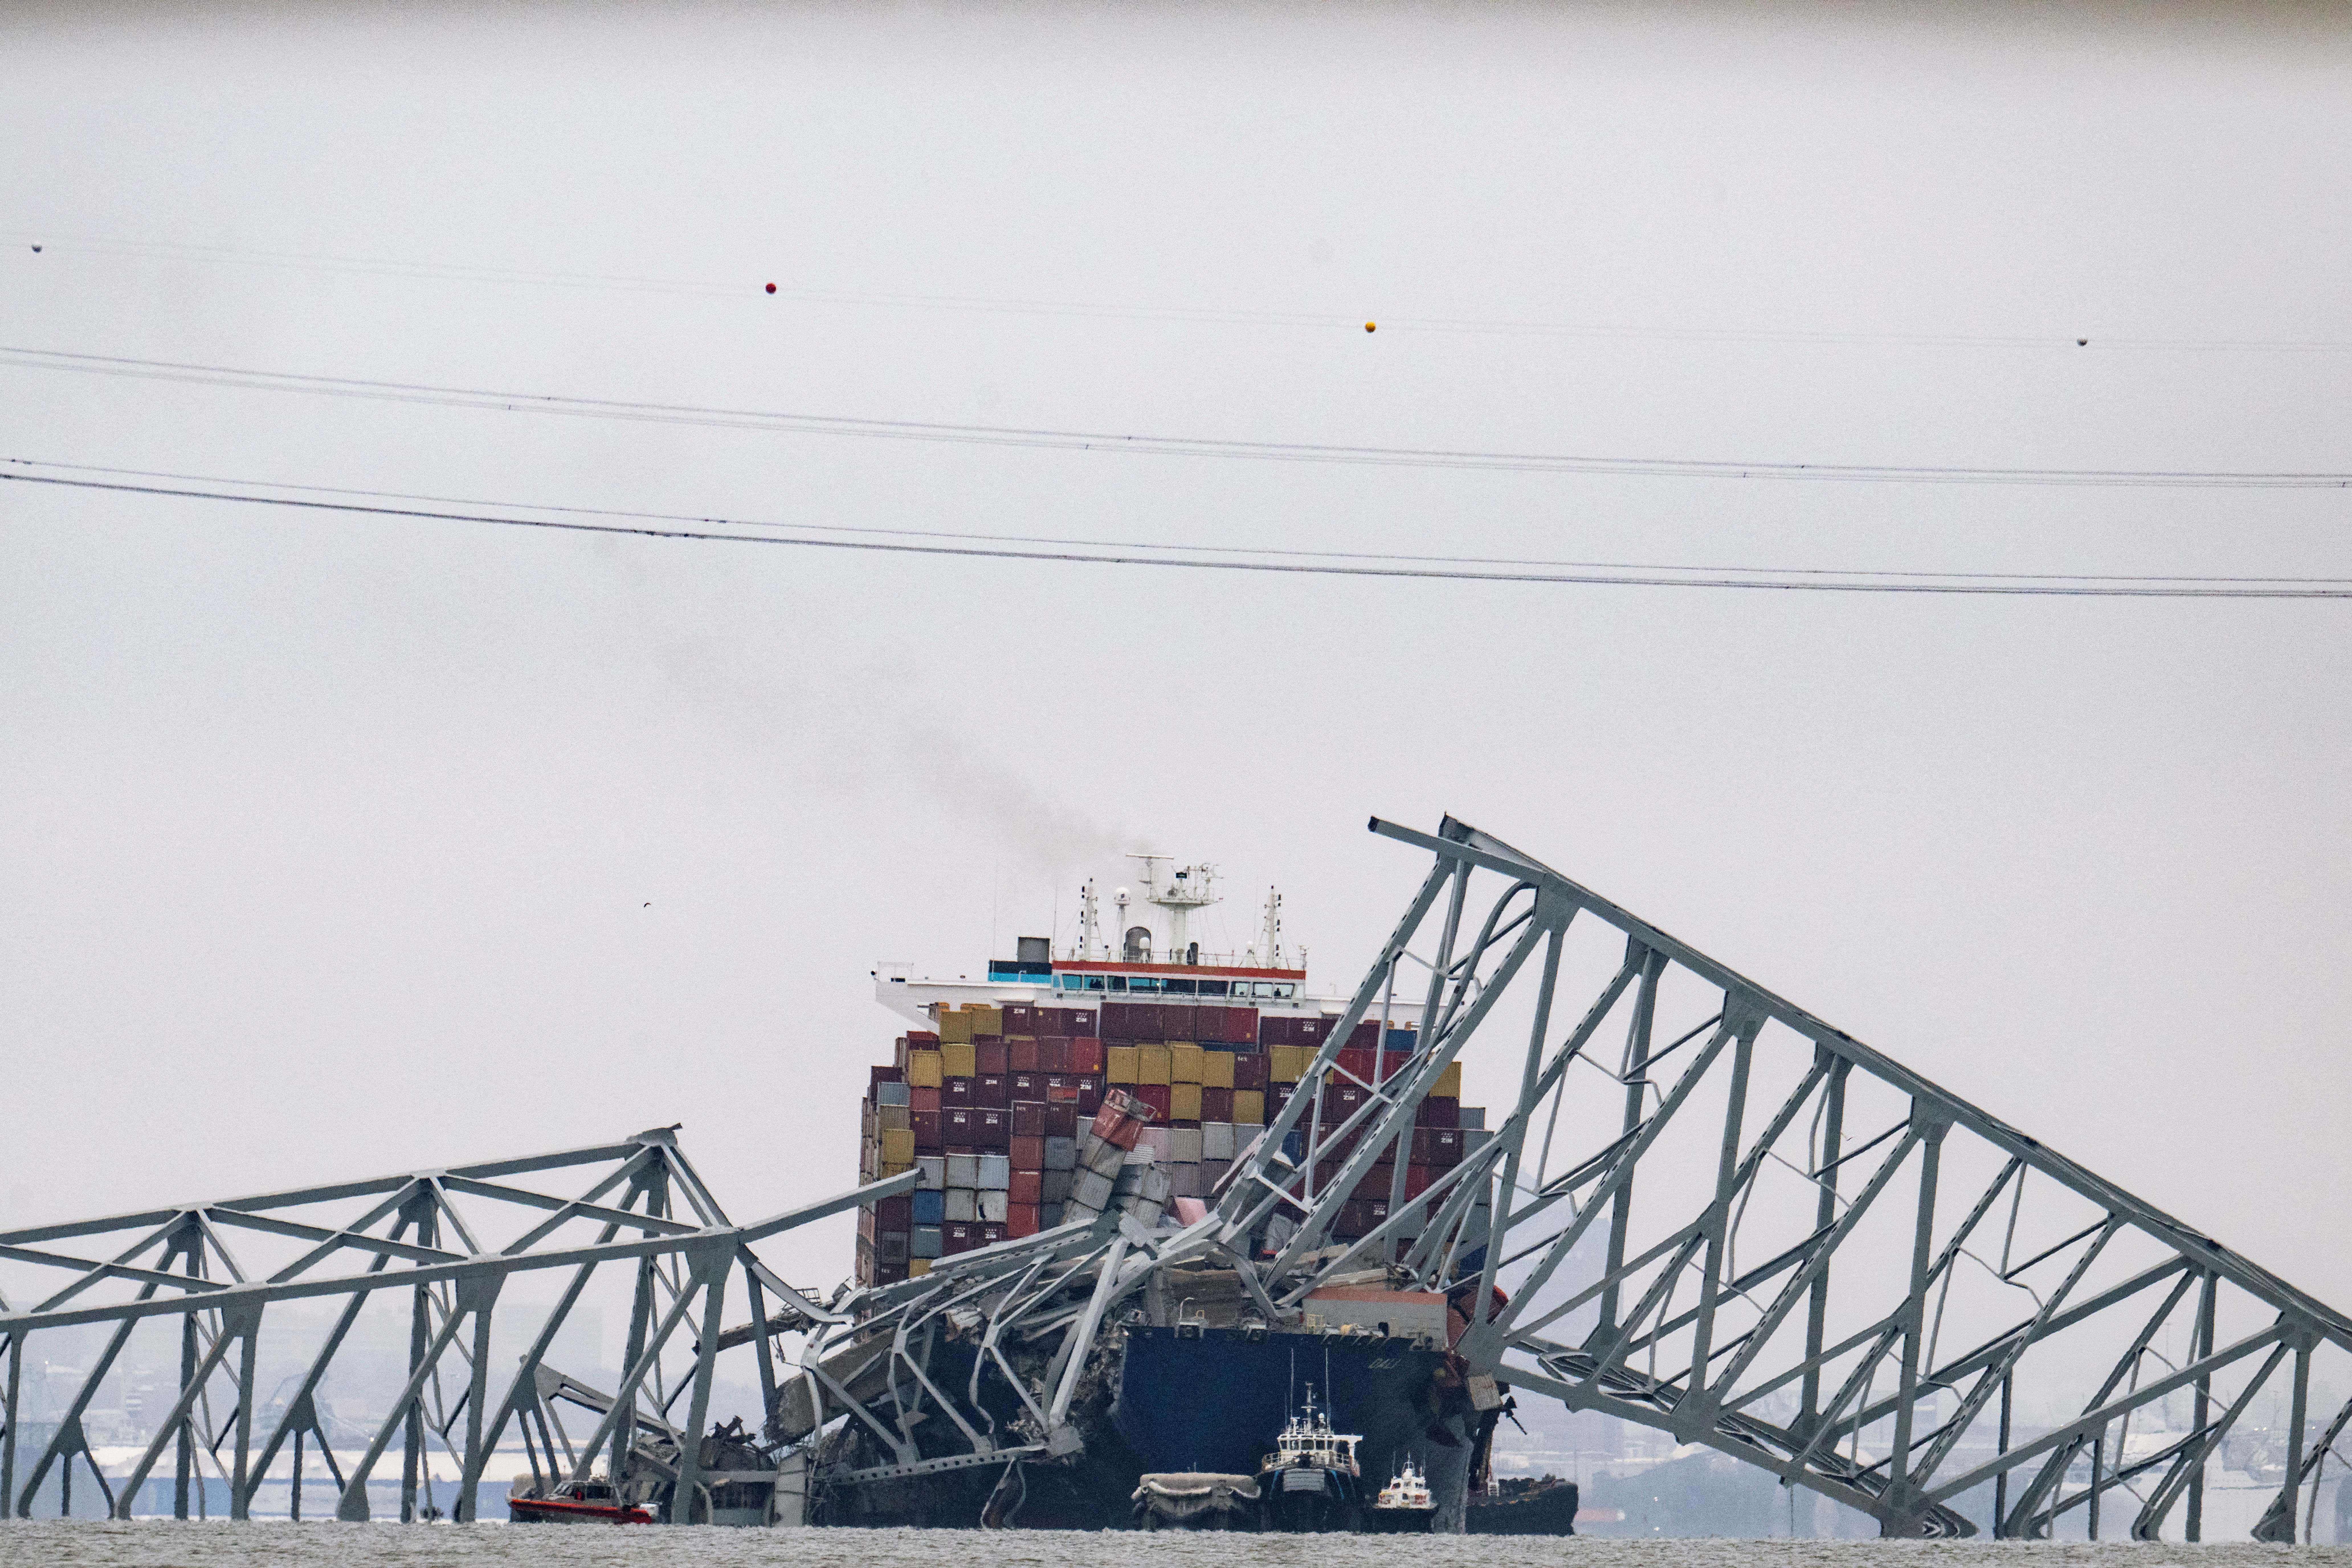 The collapsed Francis Scott Key Bridge lies on top of the container ship Dali in Baltimore, Maryland, on March 27, 2024. Authorities in Baltimore were set to focus on expanding recovery efforts on March 27 after the cargo ship slammed into the bridge, causing it to collapse and leaving six people presumed dead. All six were members of a construction crew repairing potholes on the bridge when the structure fell into the Patapsco River at around 1:30 am (0530 GMT) on March 26. (Photo by Jim WATSON / AFP)